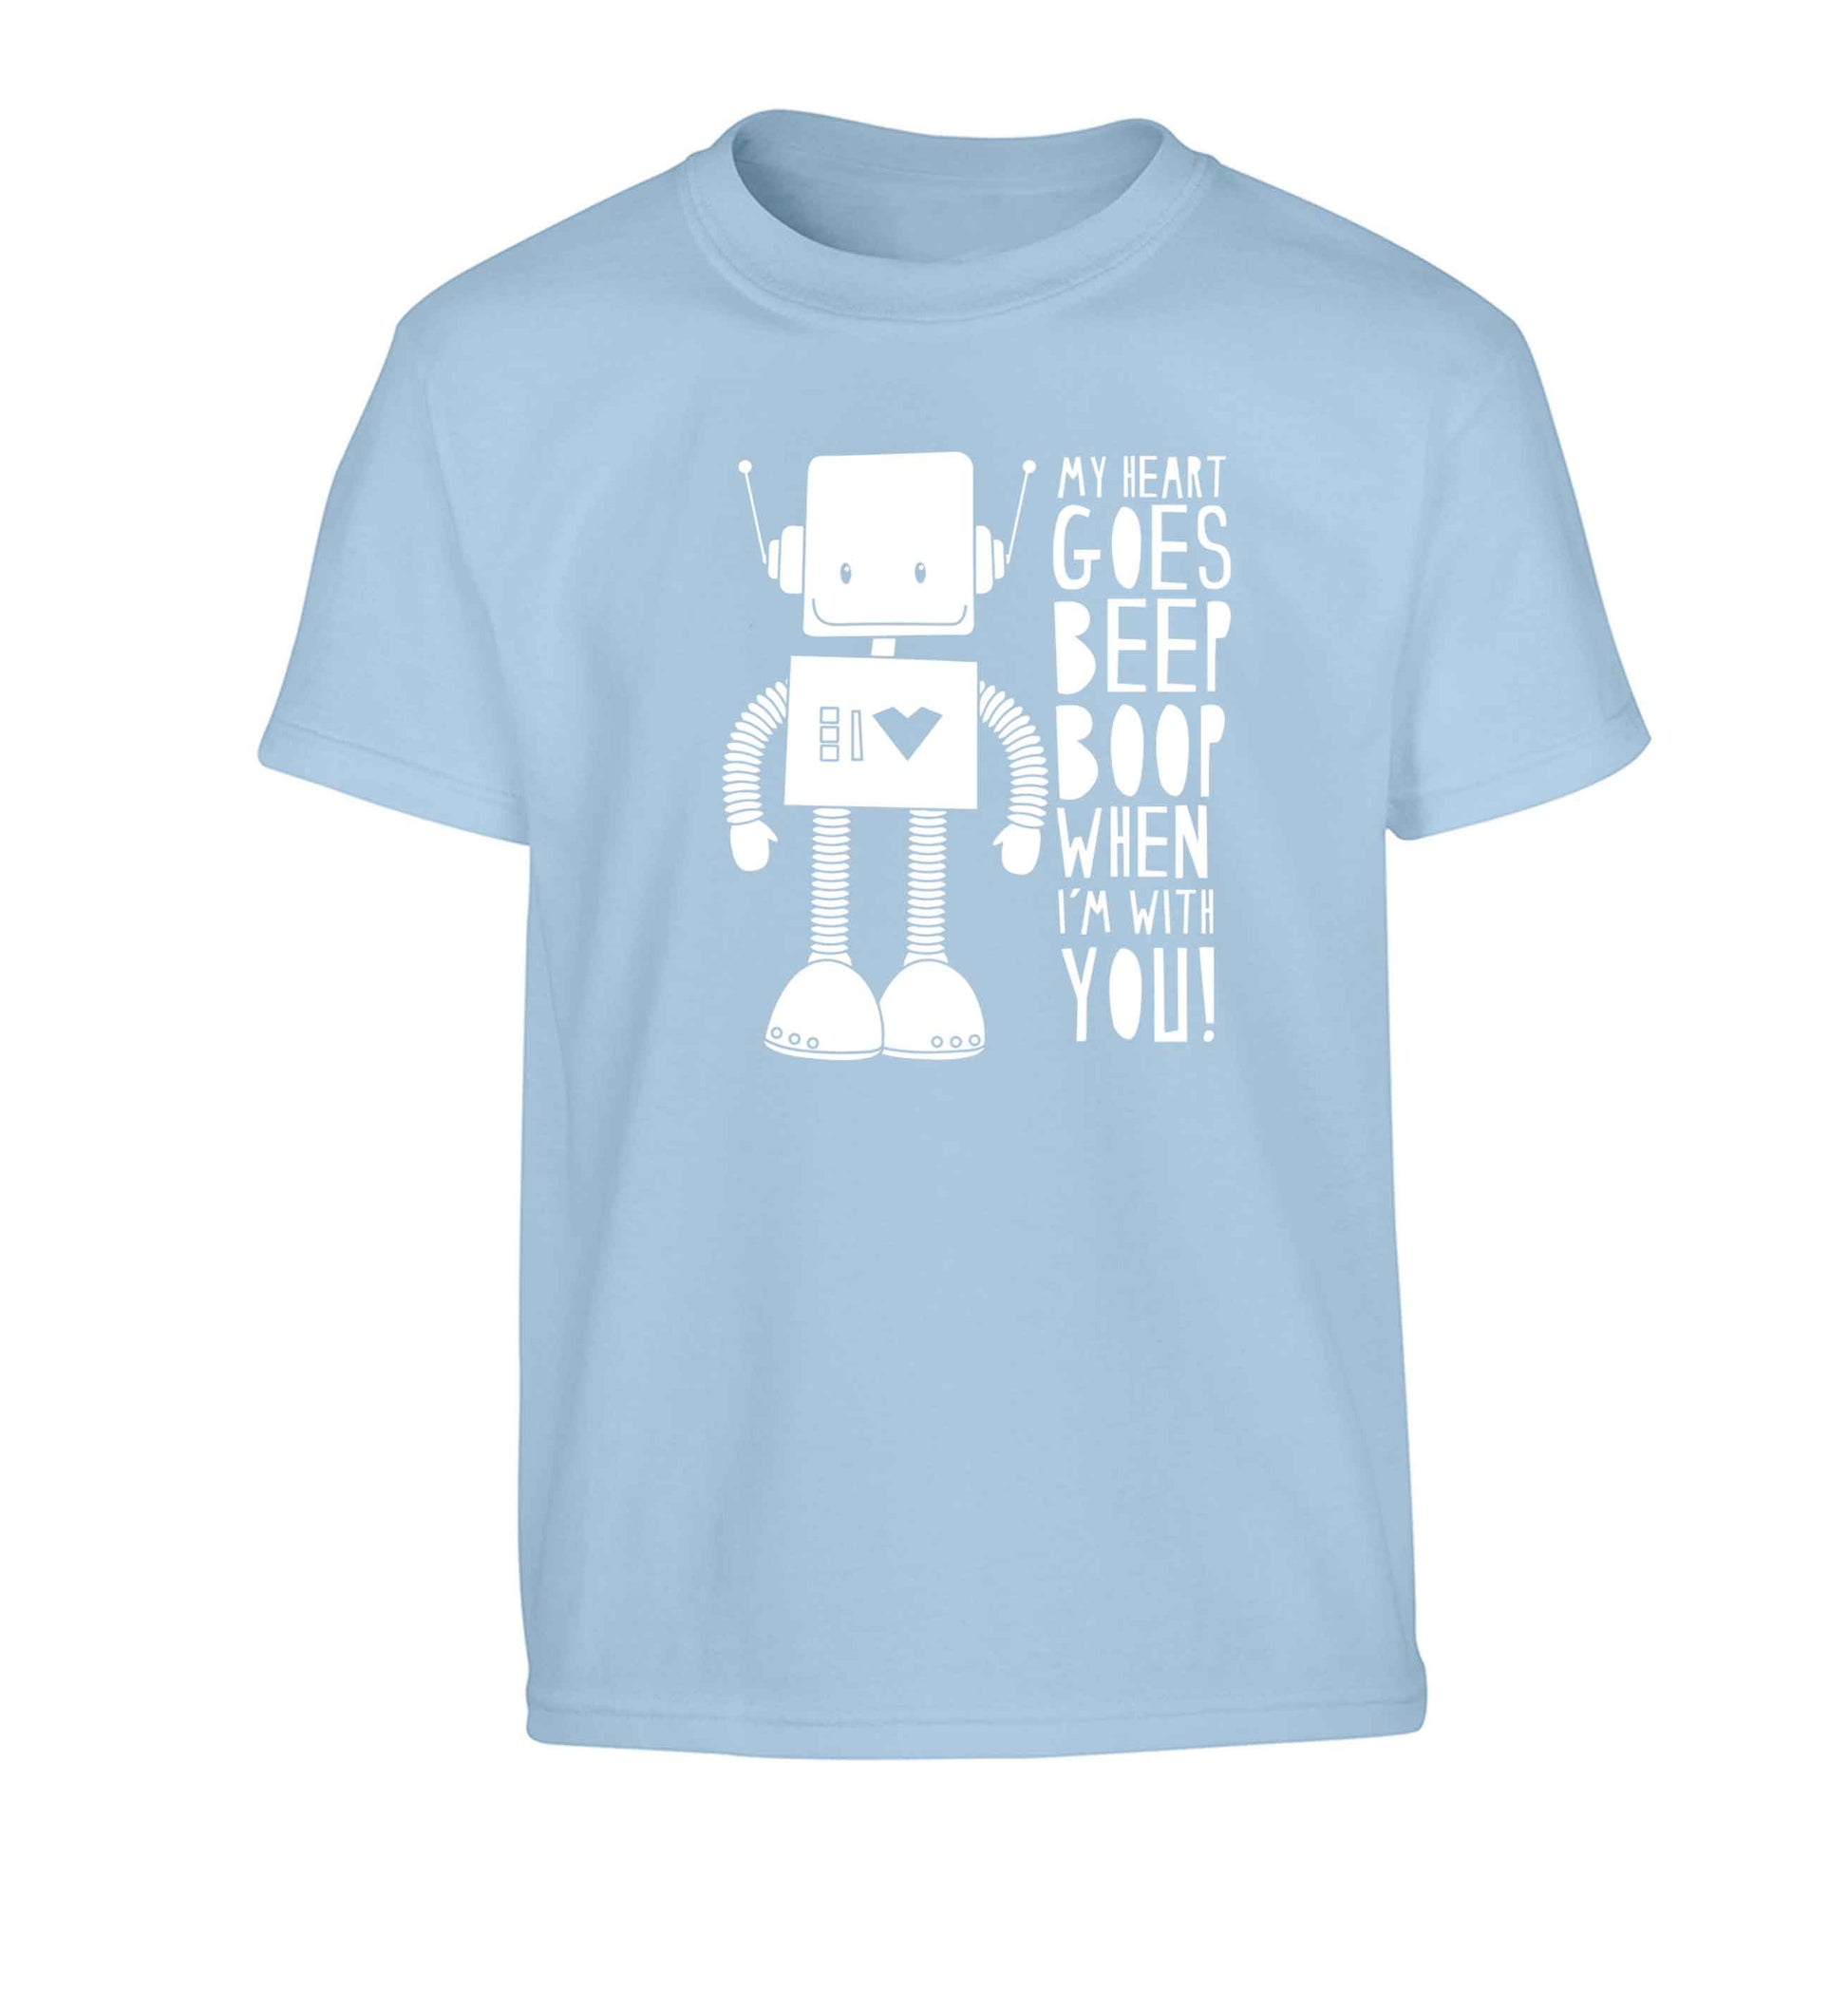 My heart goes beep boop when I'm with you Children's light blue Tshirt 12-13 Years